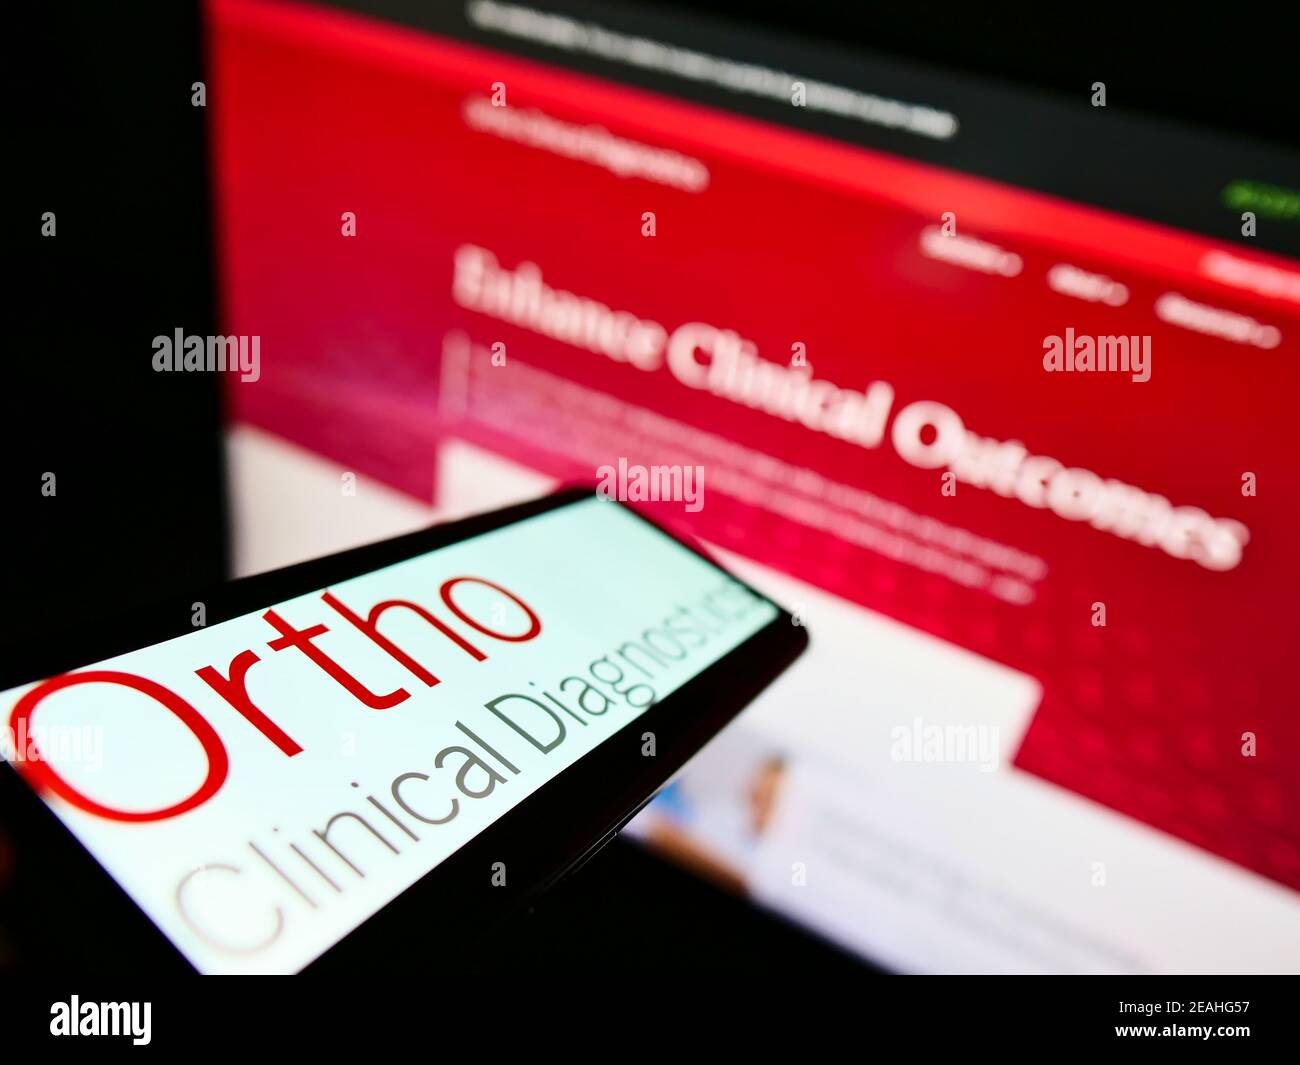 Cellphone with logo of US medical diagnostics company Ortho Clinical Diagnostics on screen in front of website. Focus on center of phone display. Stock Photo